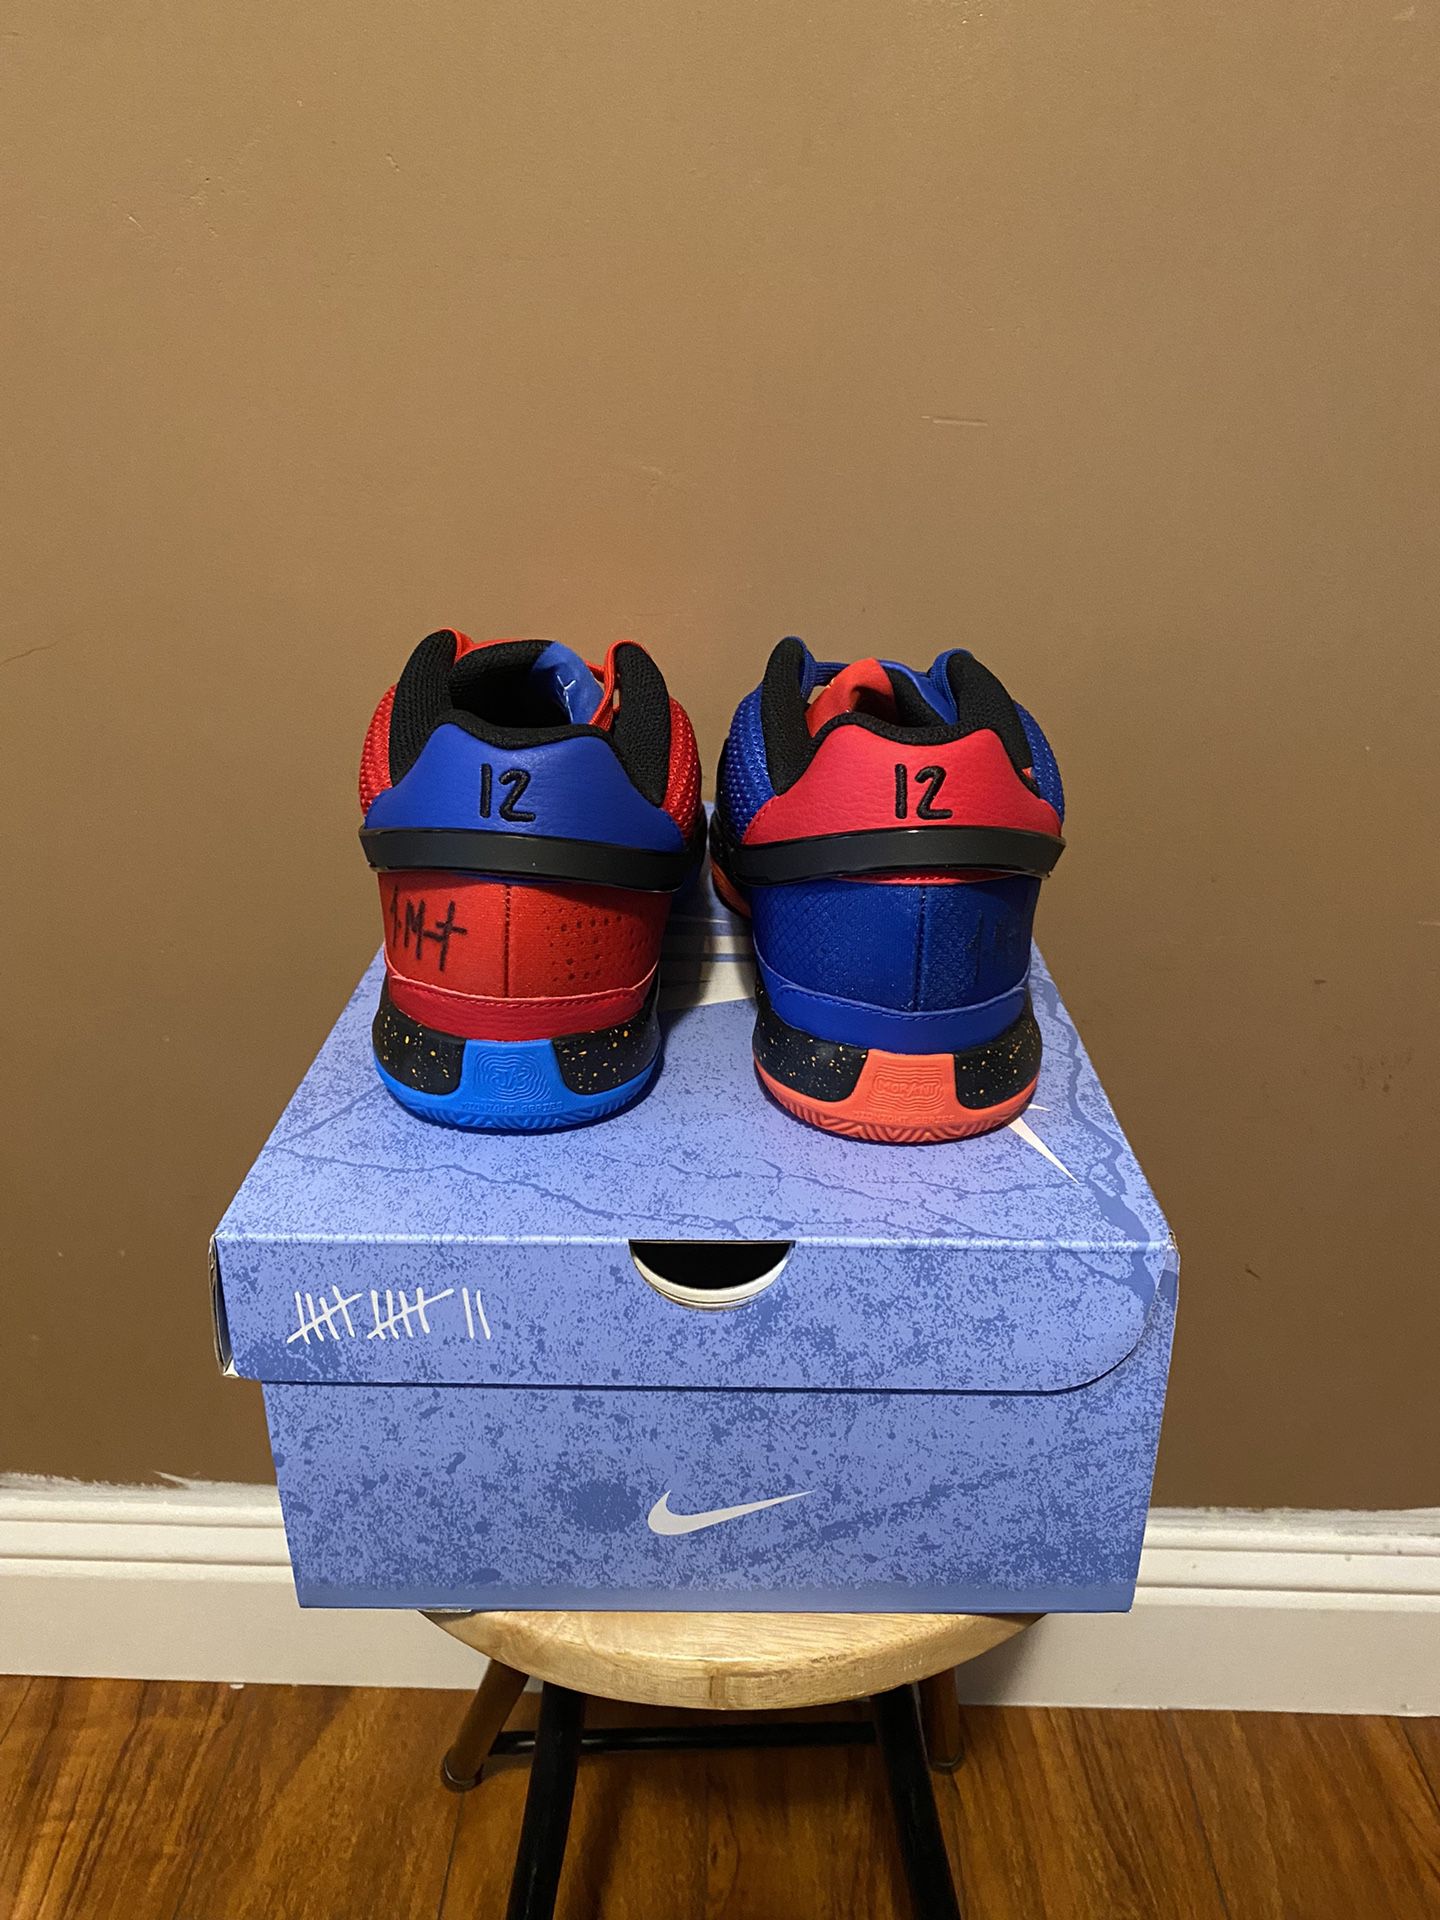 Ja Morant 1 for Sale in Vancouver, WA - OfferUp